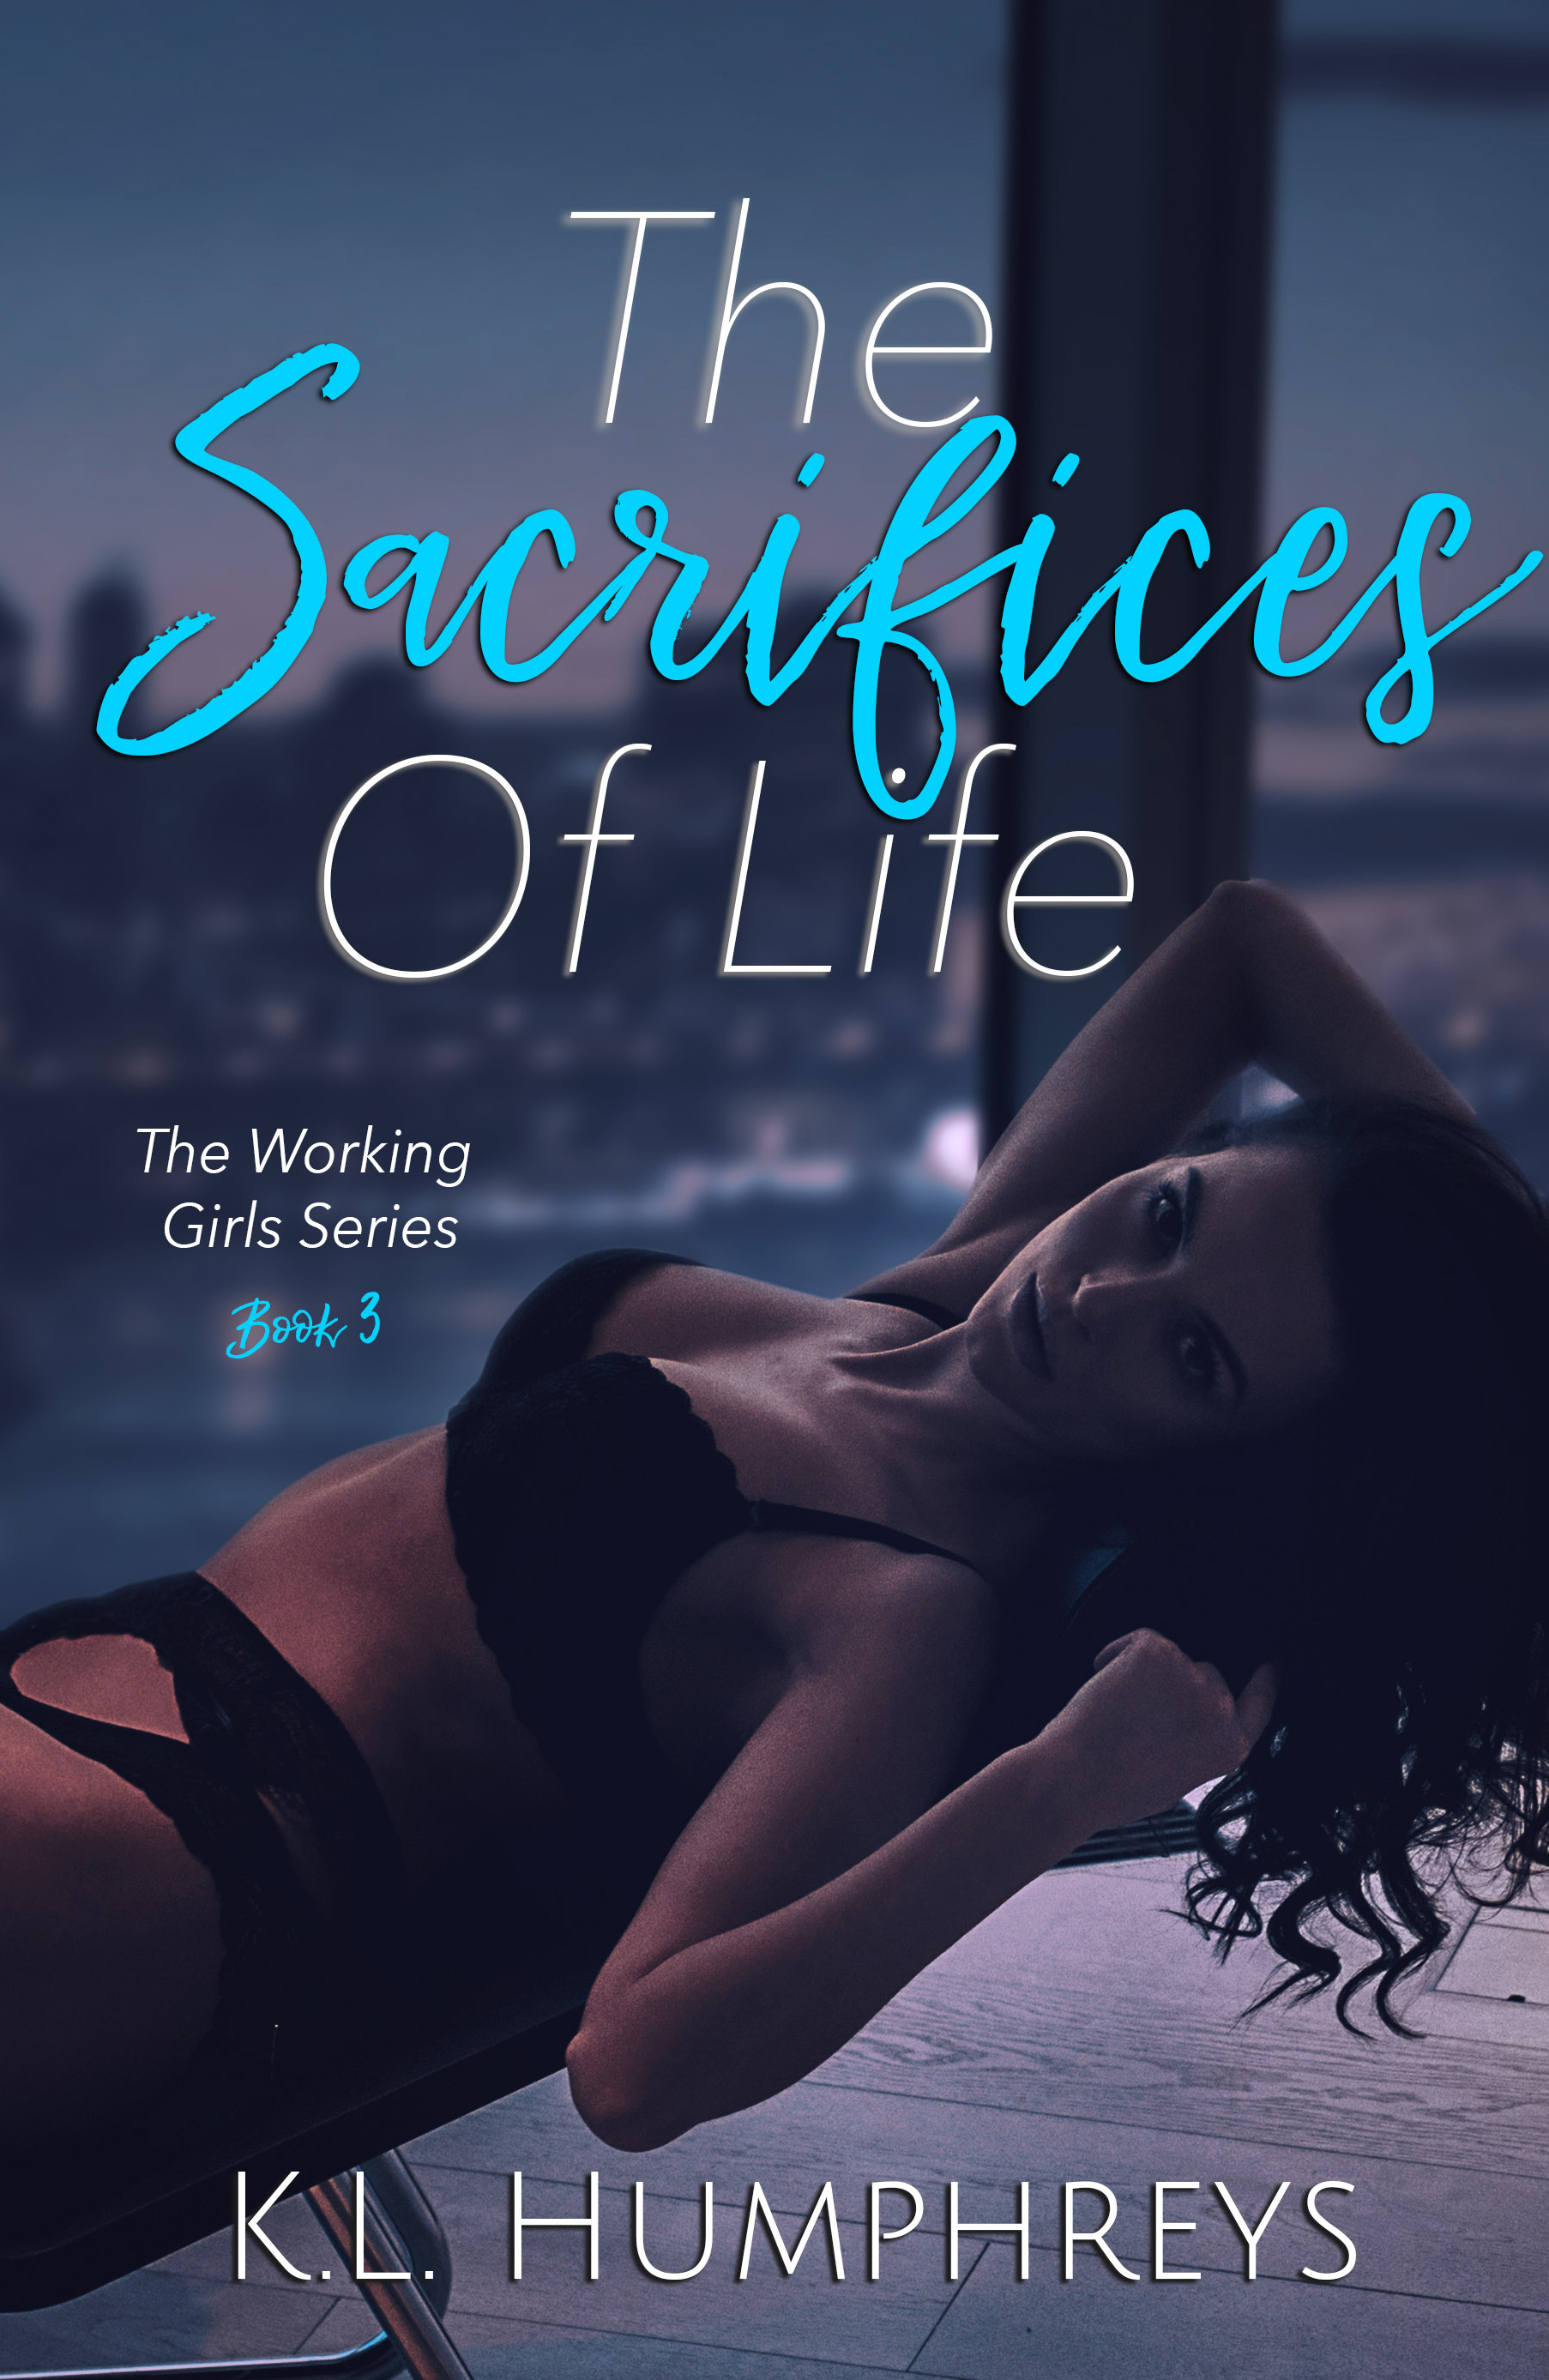 The Working Girls Book 3 - The Sacrifices Of Life.jpg